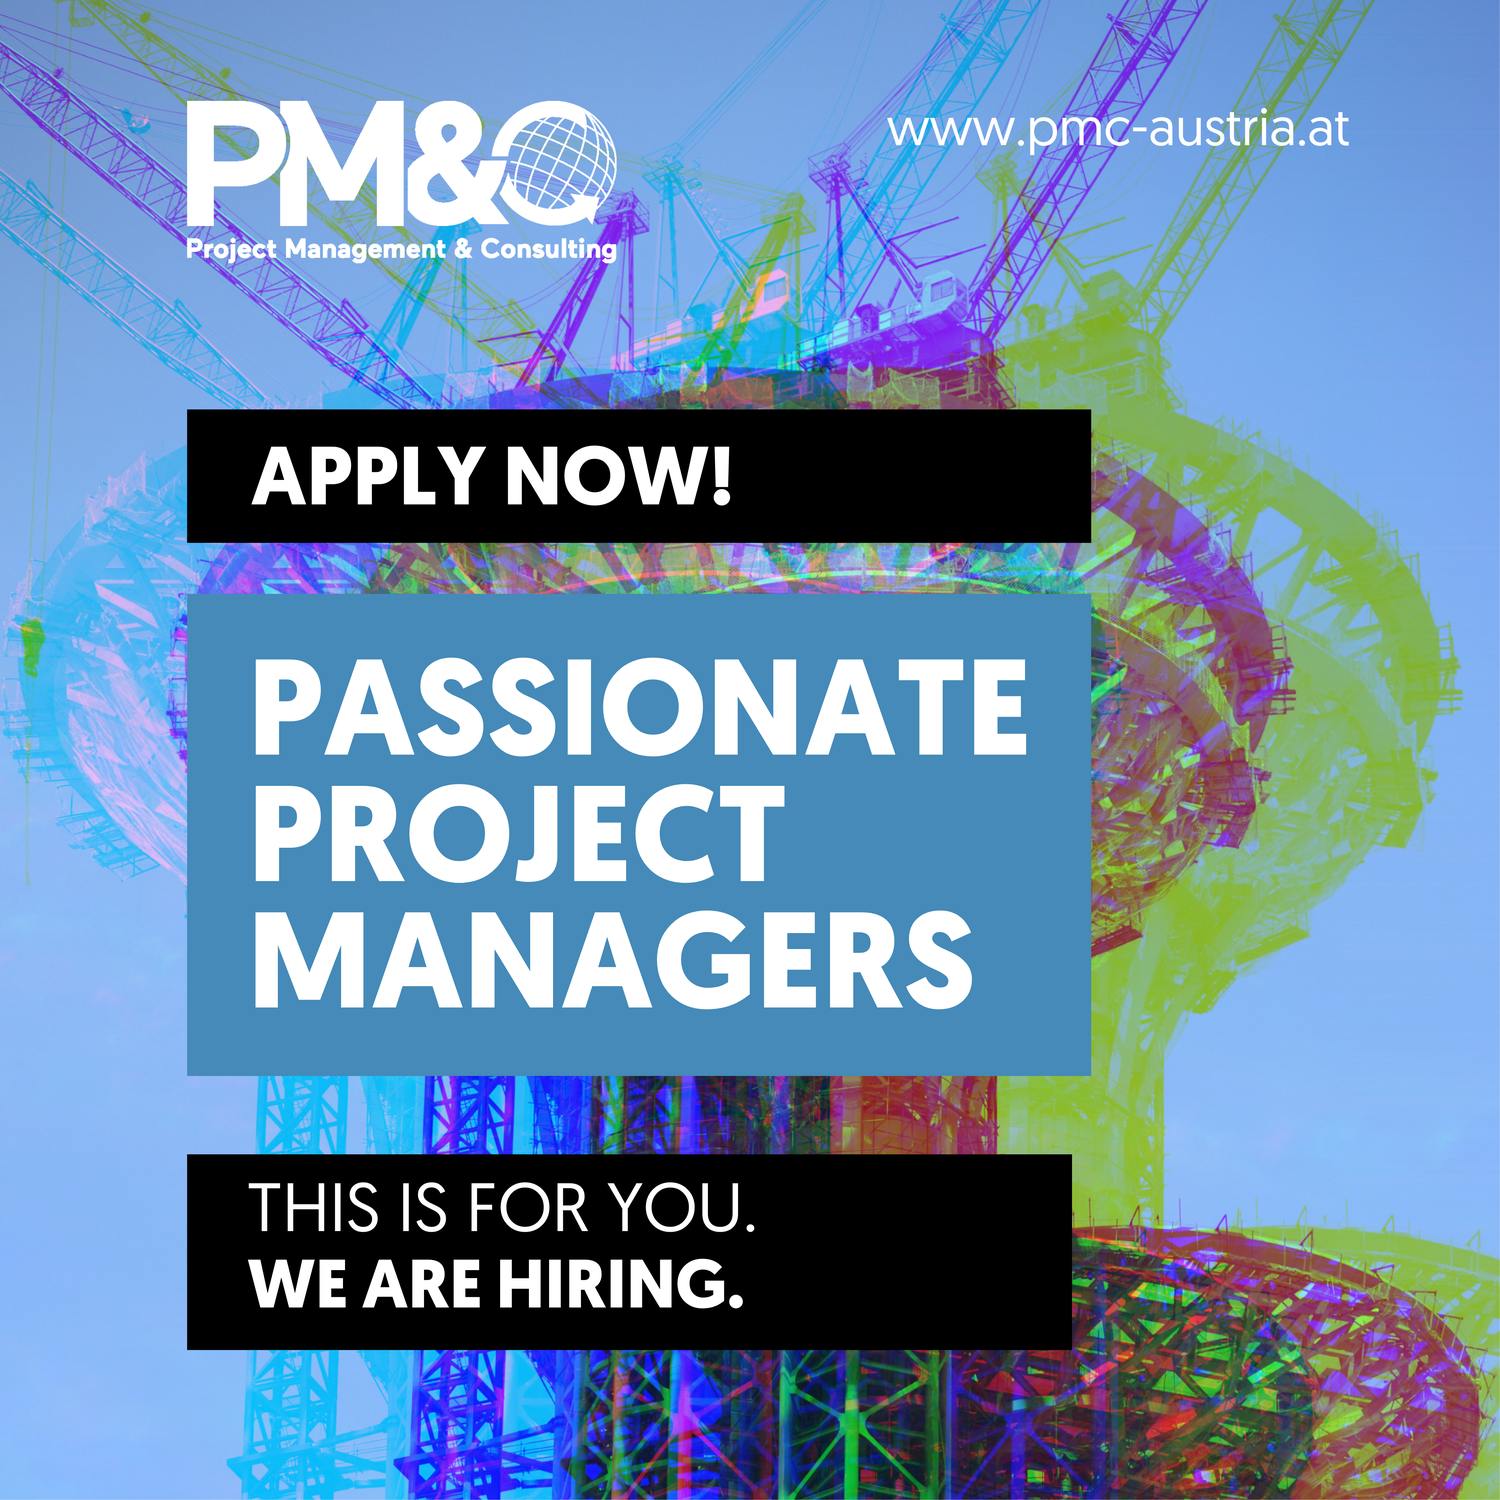 Passionate project managers –  This is for you. We are hiring.